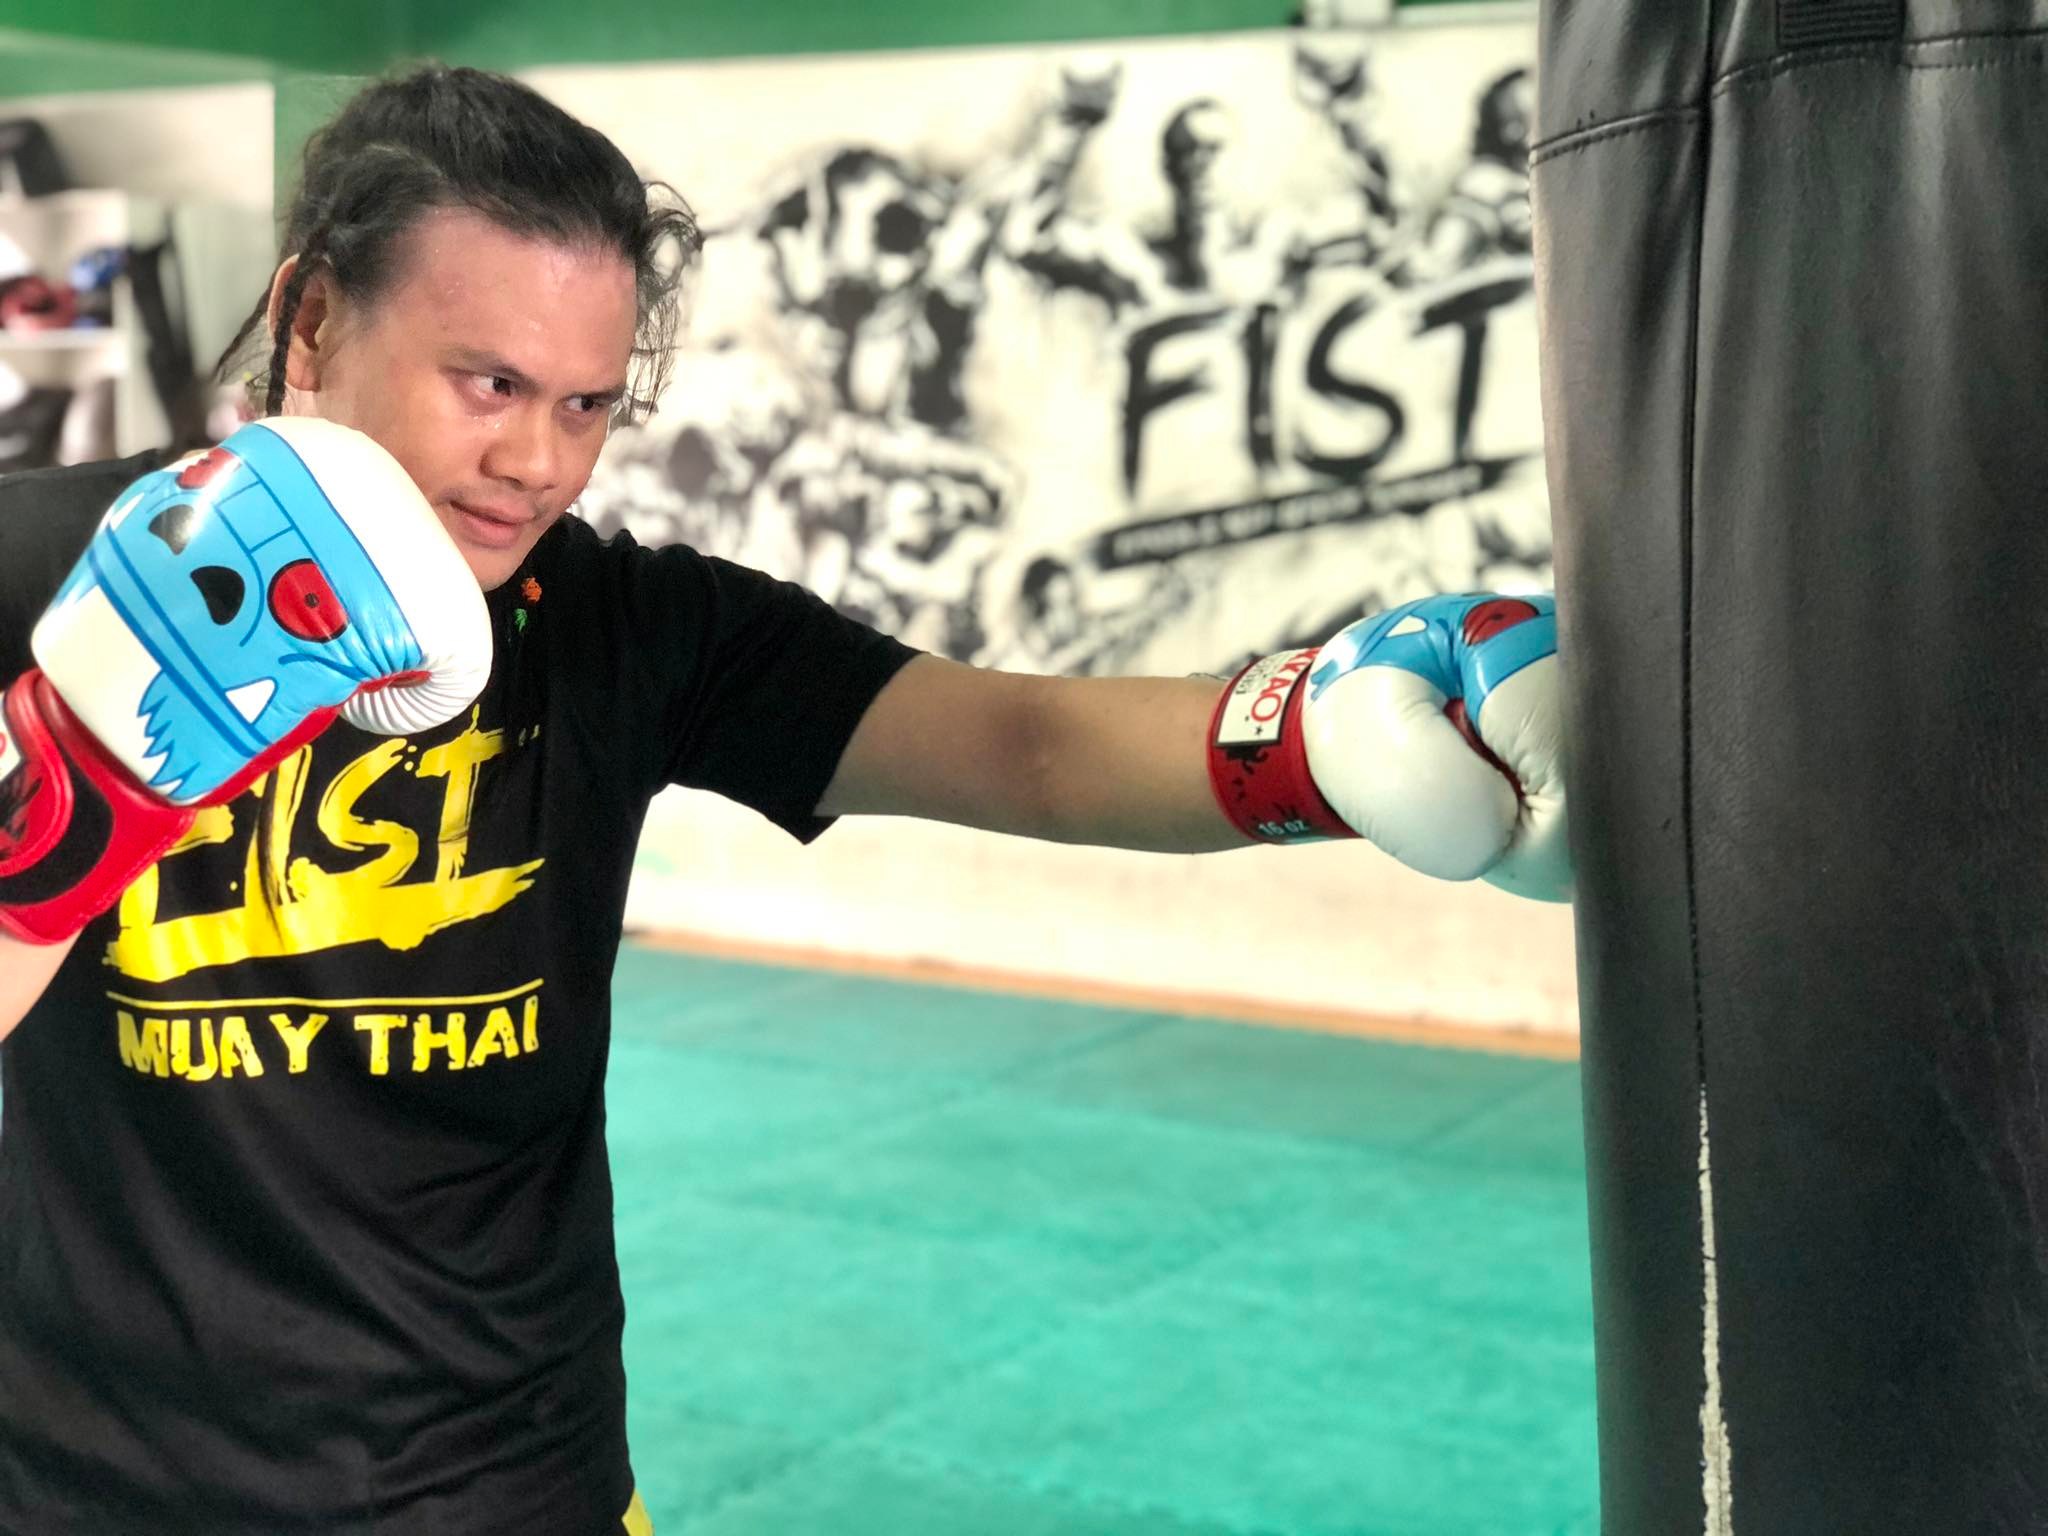 cheapest gym membership philippines - fist gym